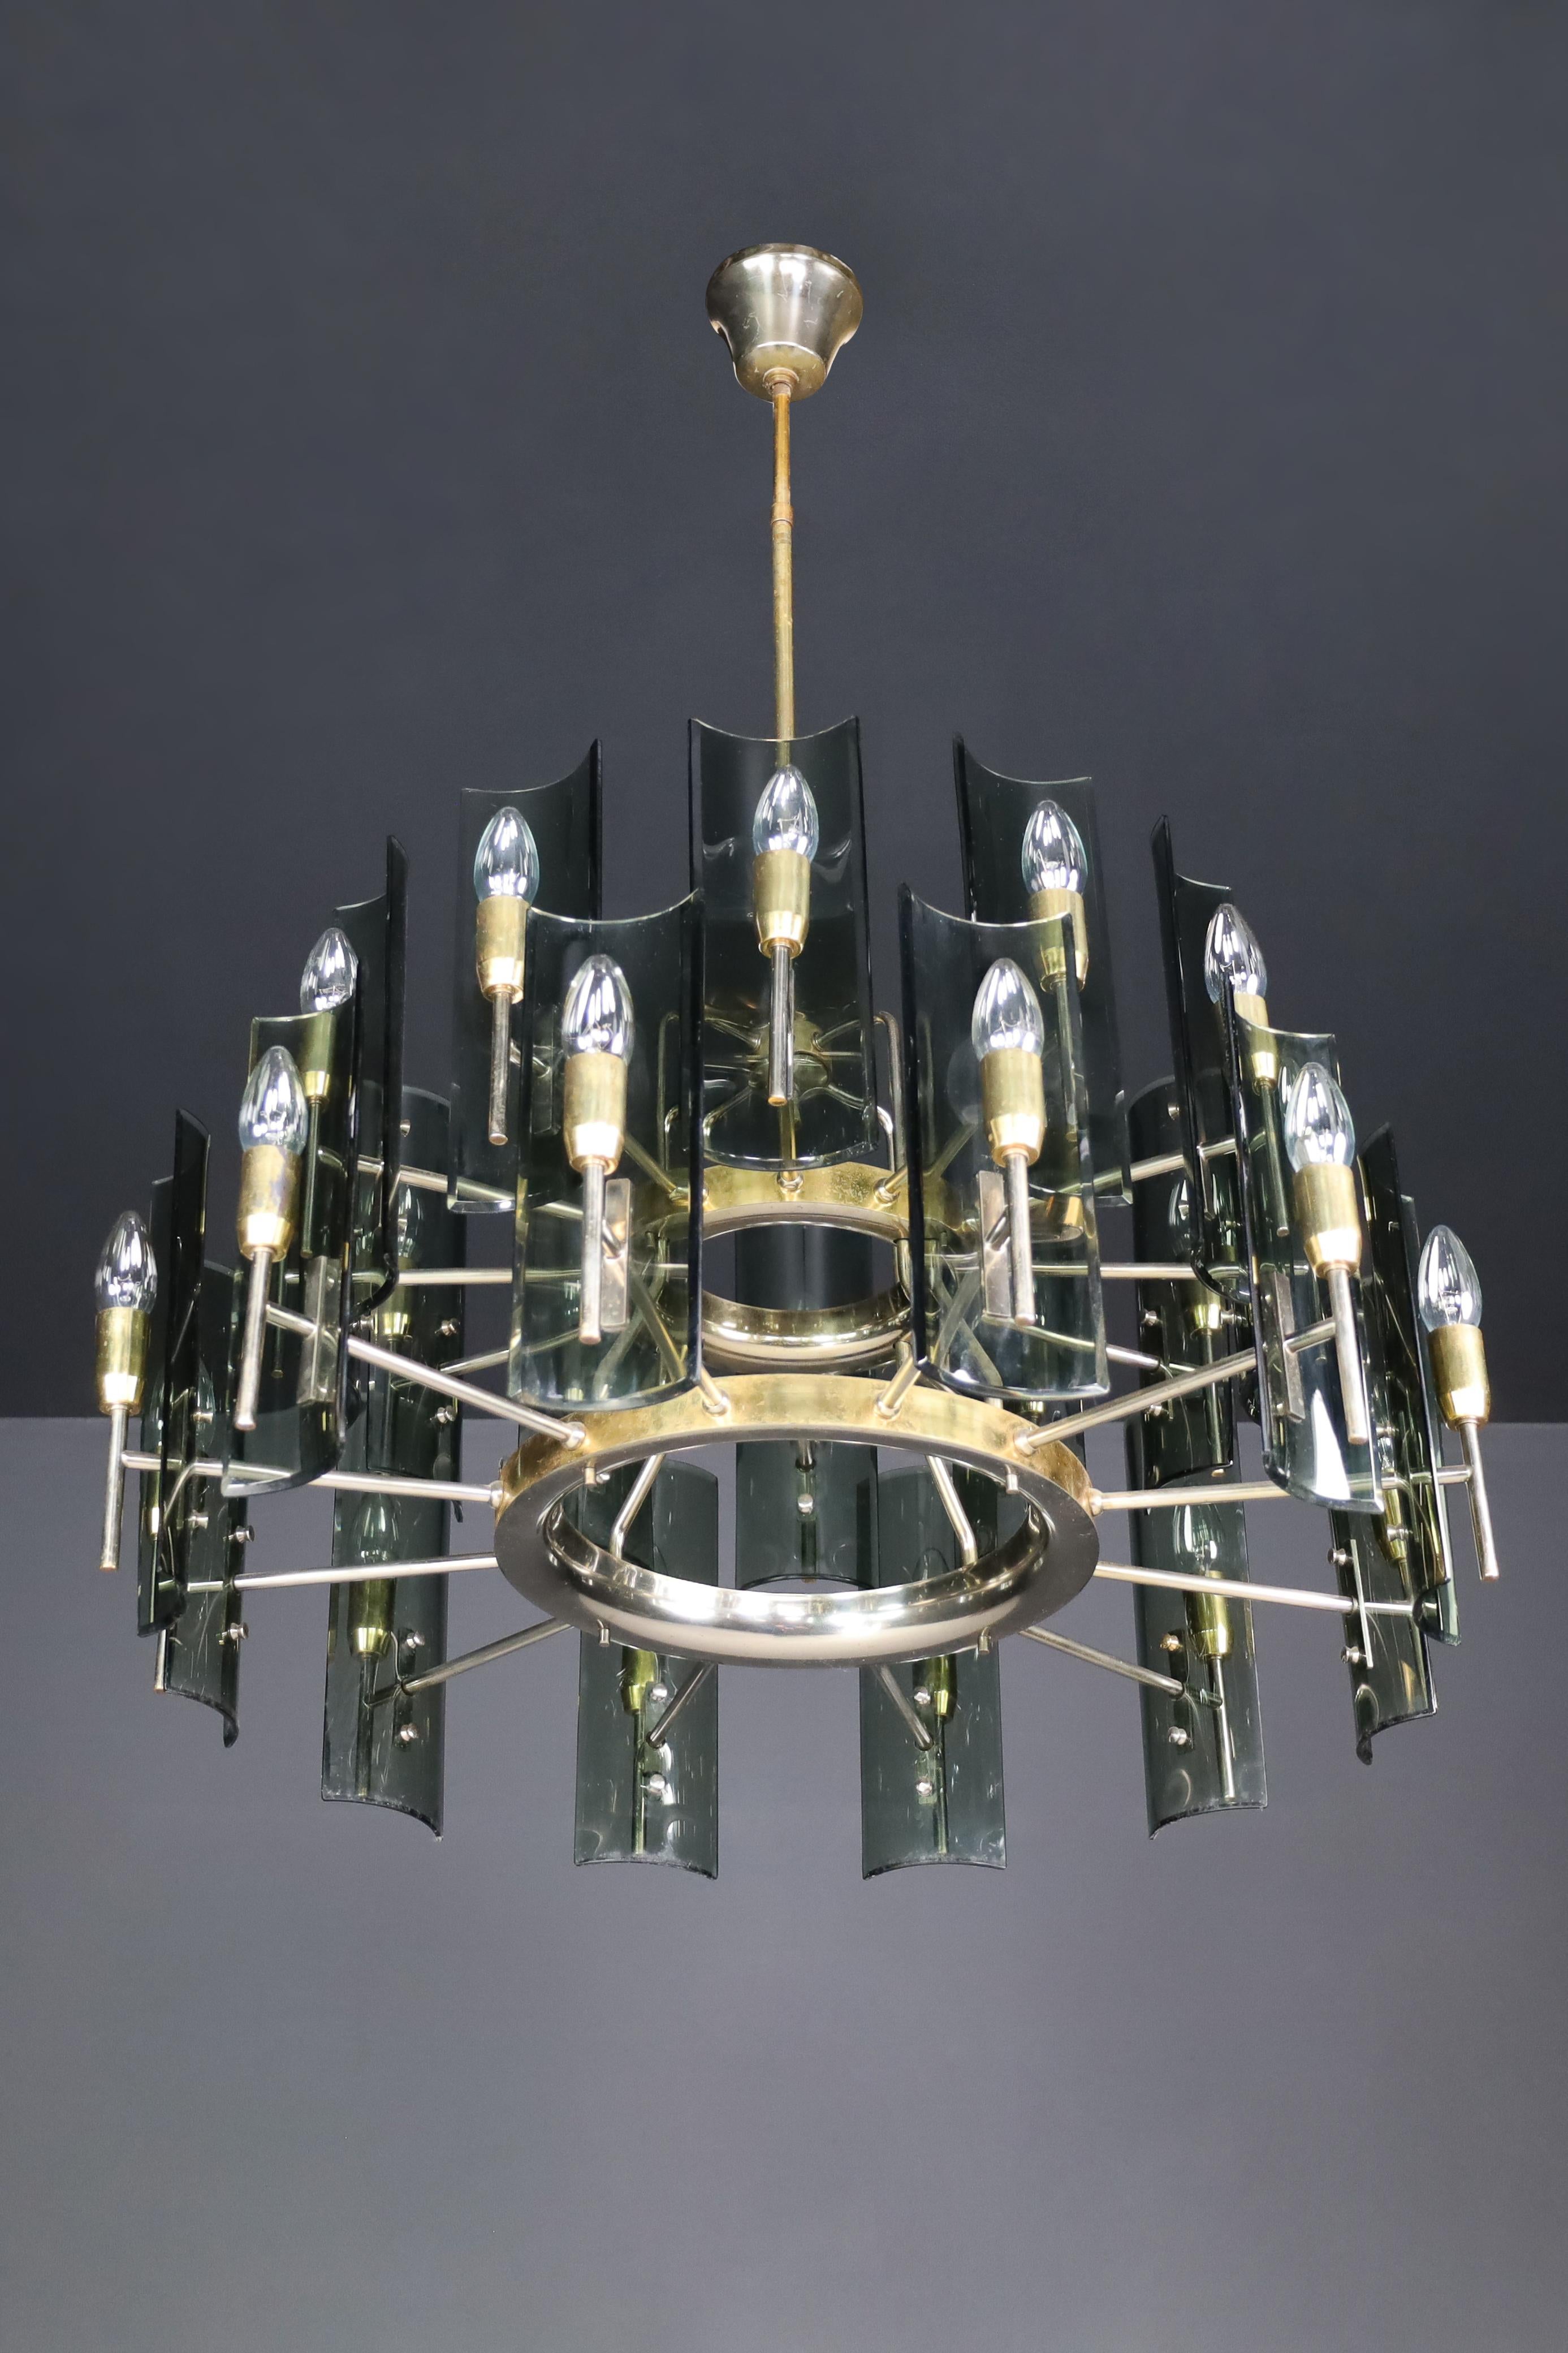 Gino Paroldo for Fontana Arte Large Chandelier in Brass and Curved Glass, Italy 1950s

Italian designer Gino Paroldo created a remarkable large chandelier made of brass and glass in the 1950s. This sculptural piece is a perfect representation of